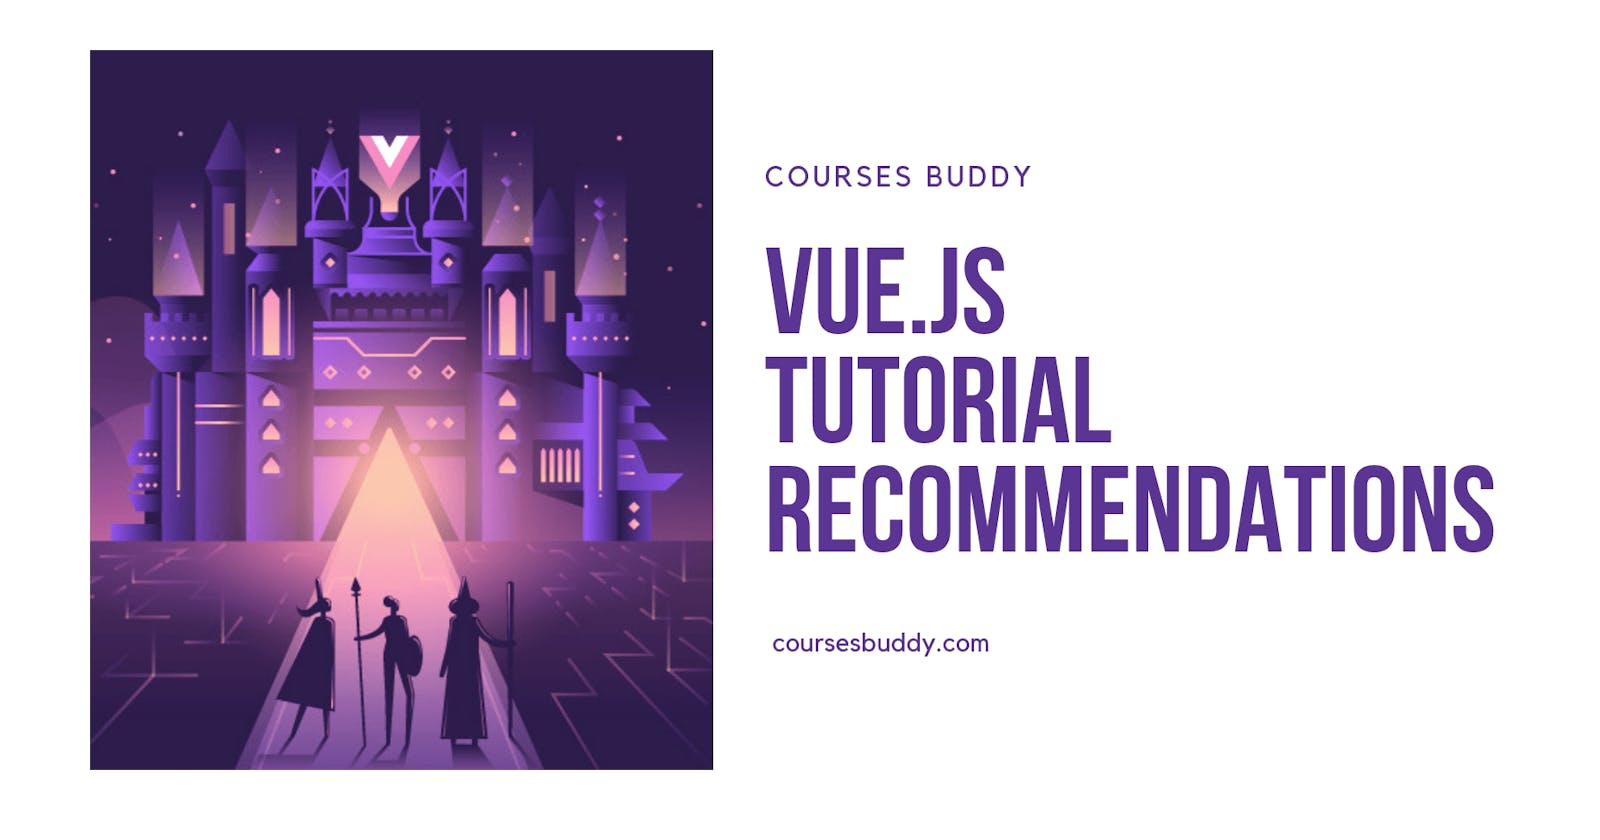 Vue.js Tutorial Recommendations: Learn Vue in 2019! - Courses Buddy